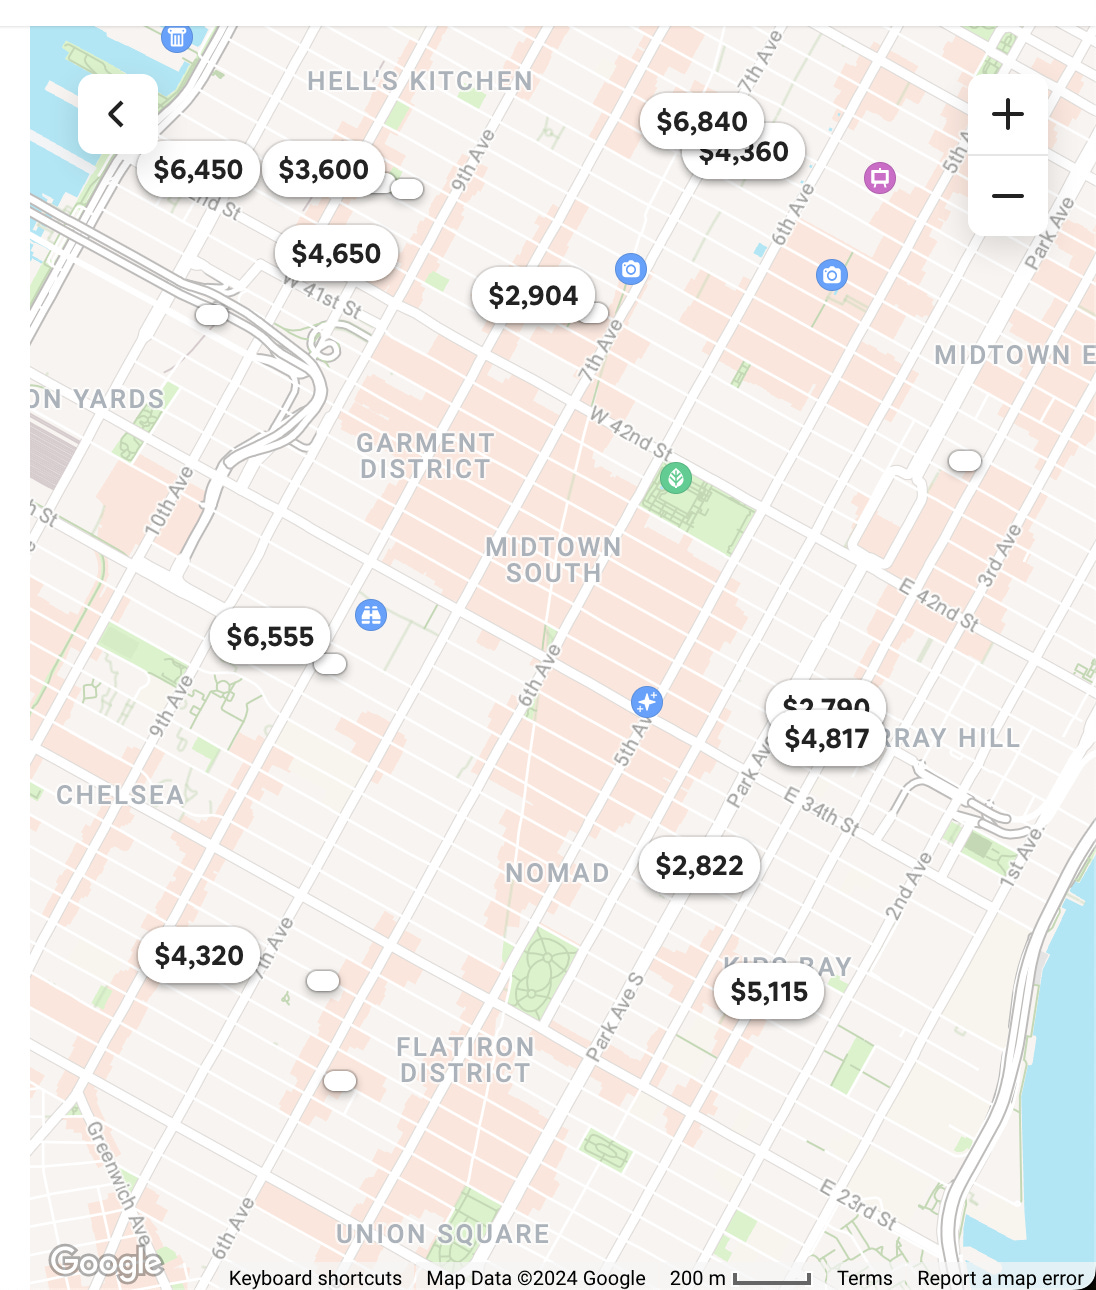 The zoom level used for Airbnb